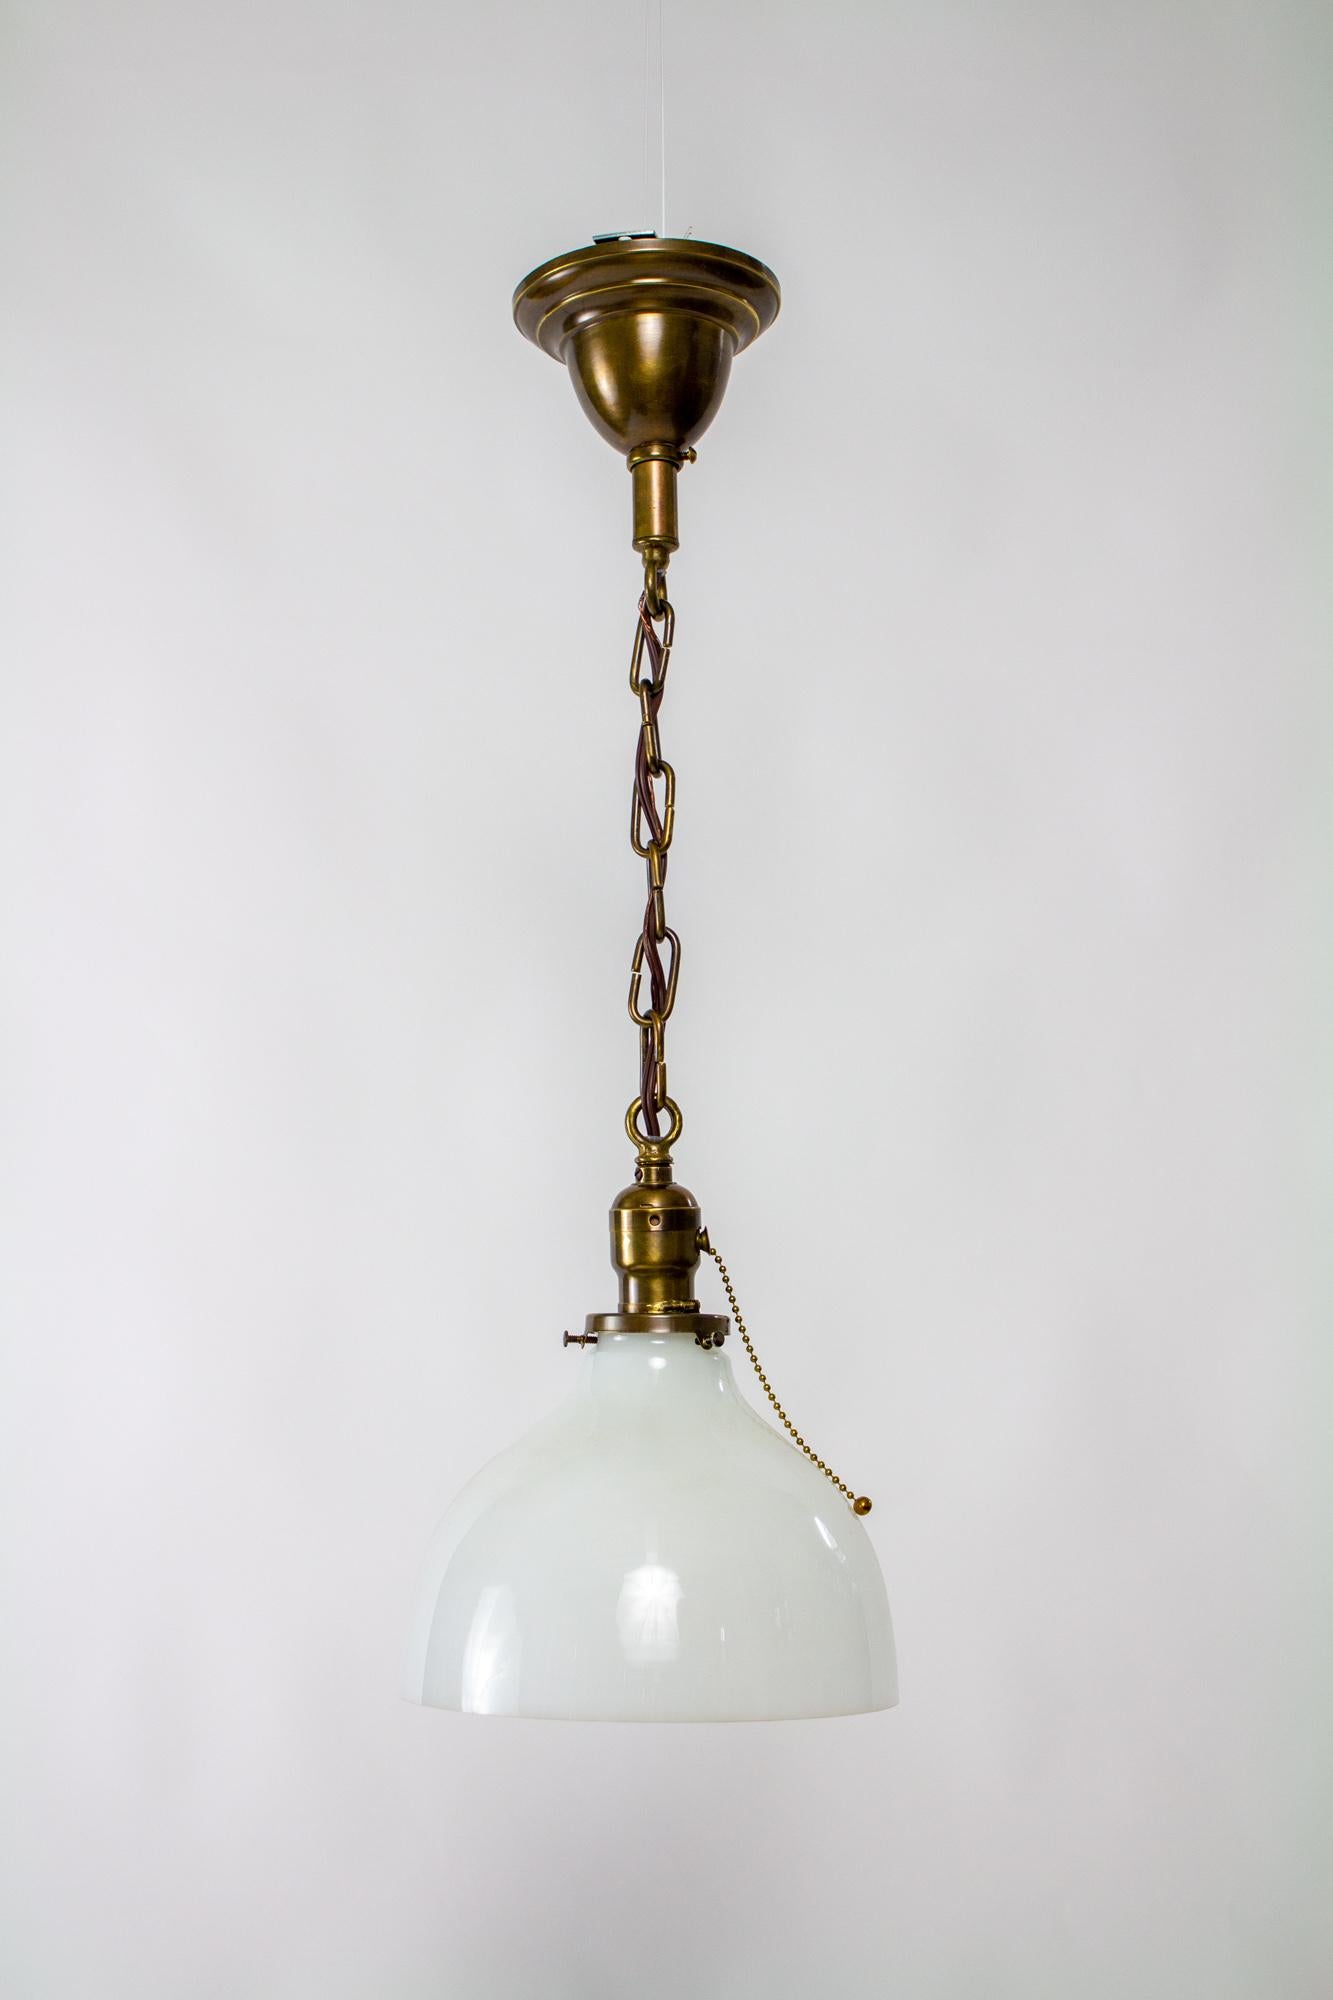 A classic hanging pendant light. White milk glass bell shaped shade. 2 ¼” fitter. Fixture and chain is brass with a medium patina. Single standard base bulb, 75 watt max. Completely restored and rewired, ready to hang. 24